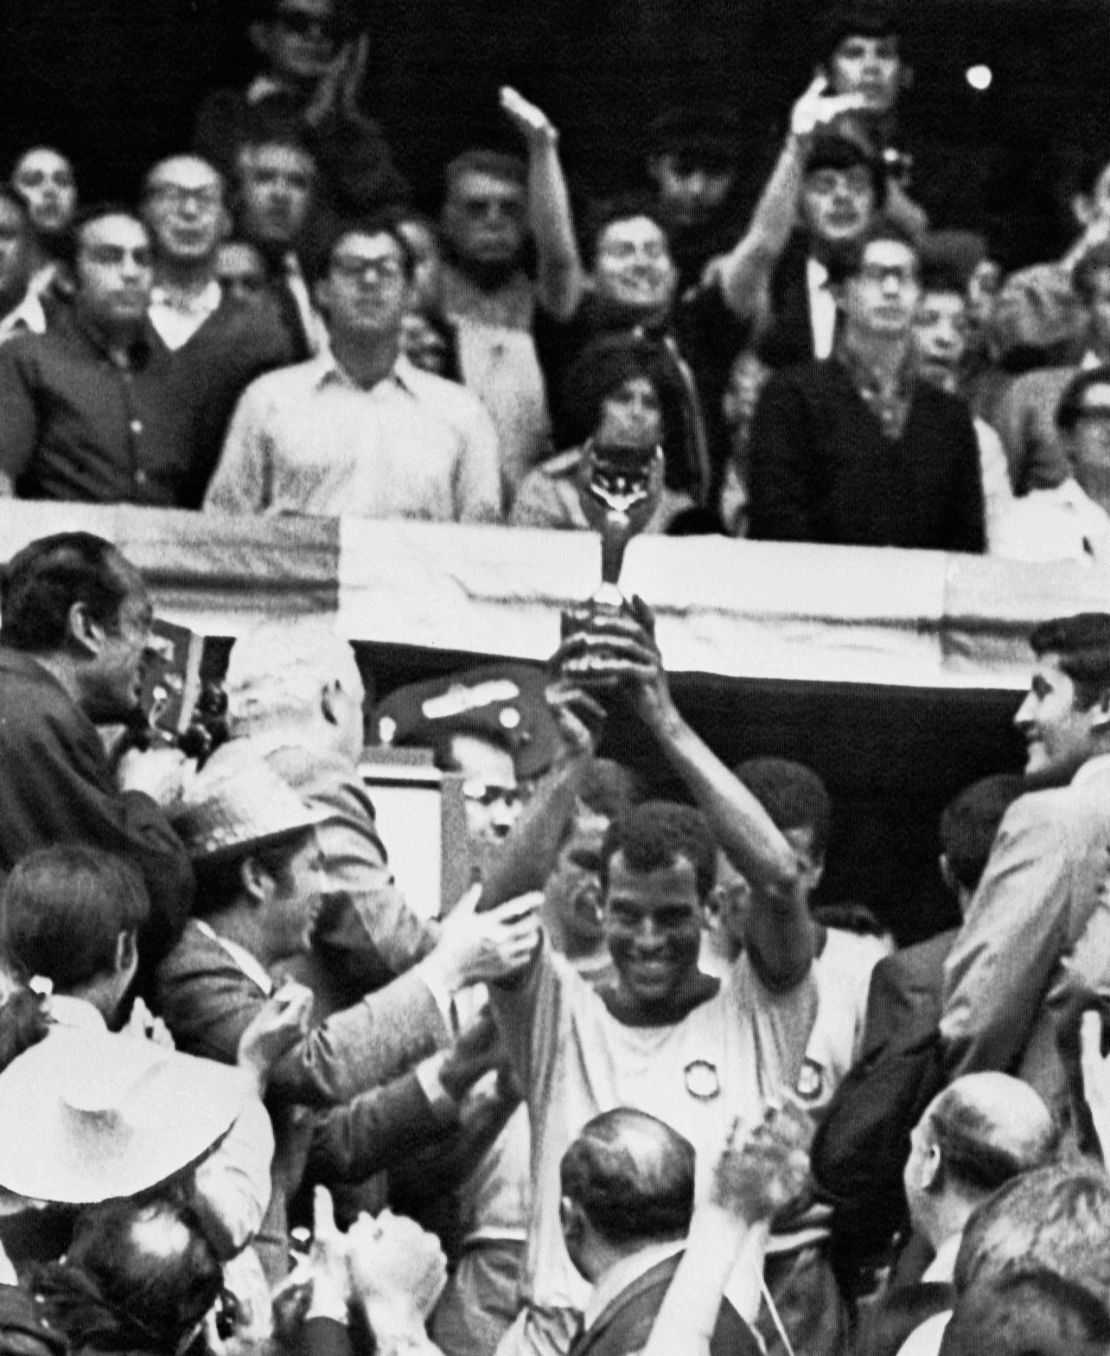 Captain Carlos Alberto holds aloft the Jules Rimet Cup after Brazil defeated Italy 4-1 in the 1970 World Cup final.